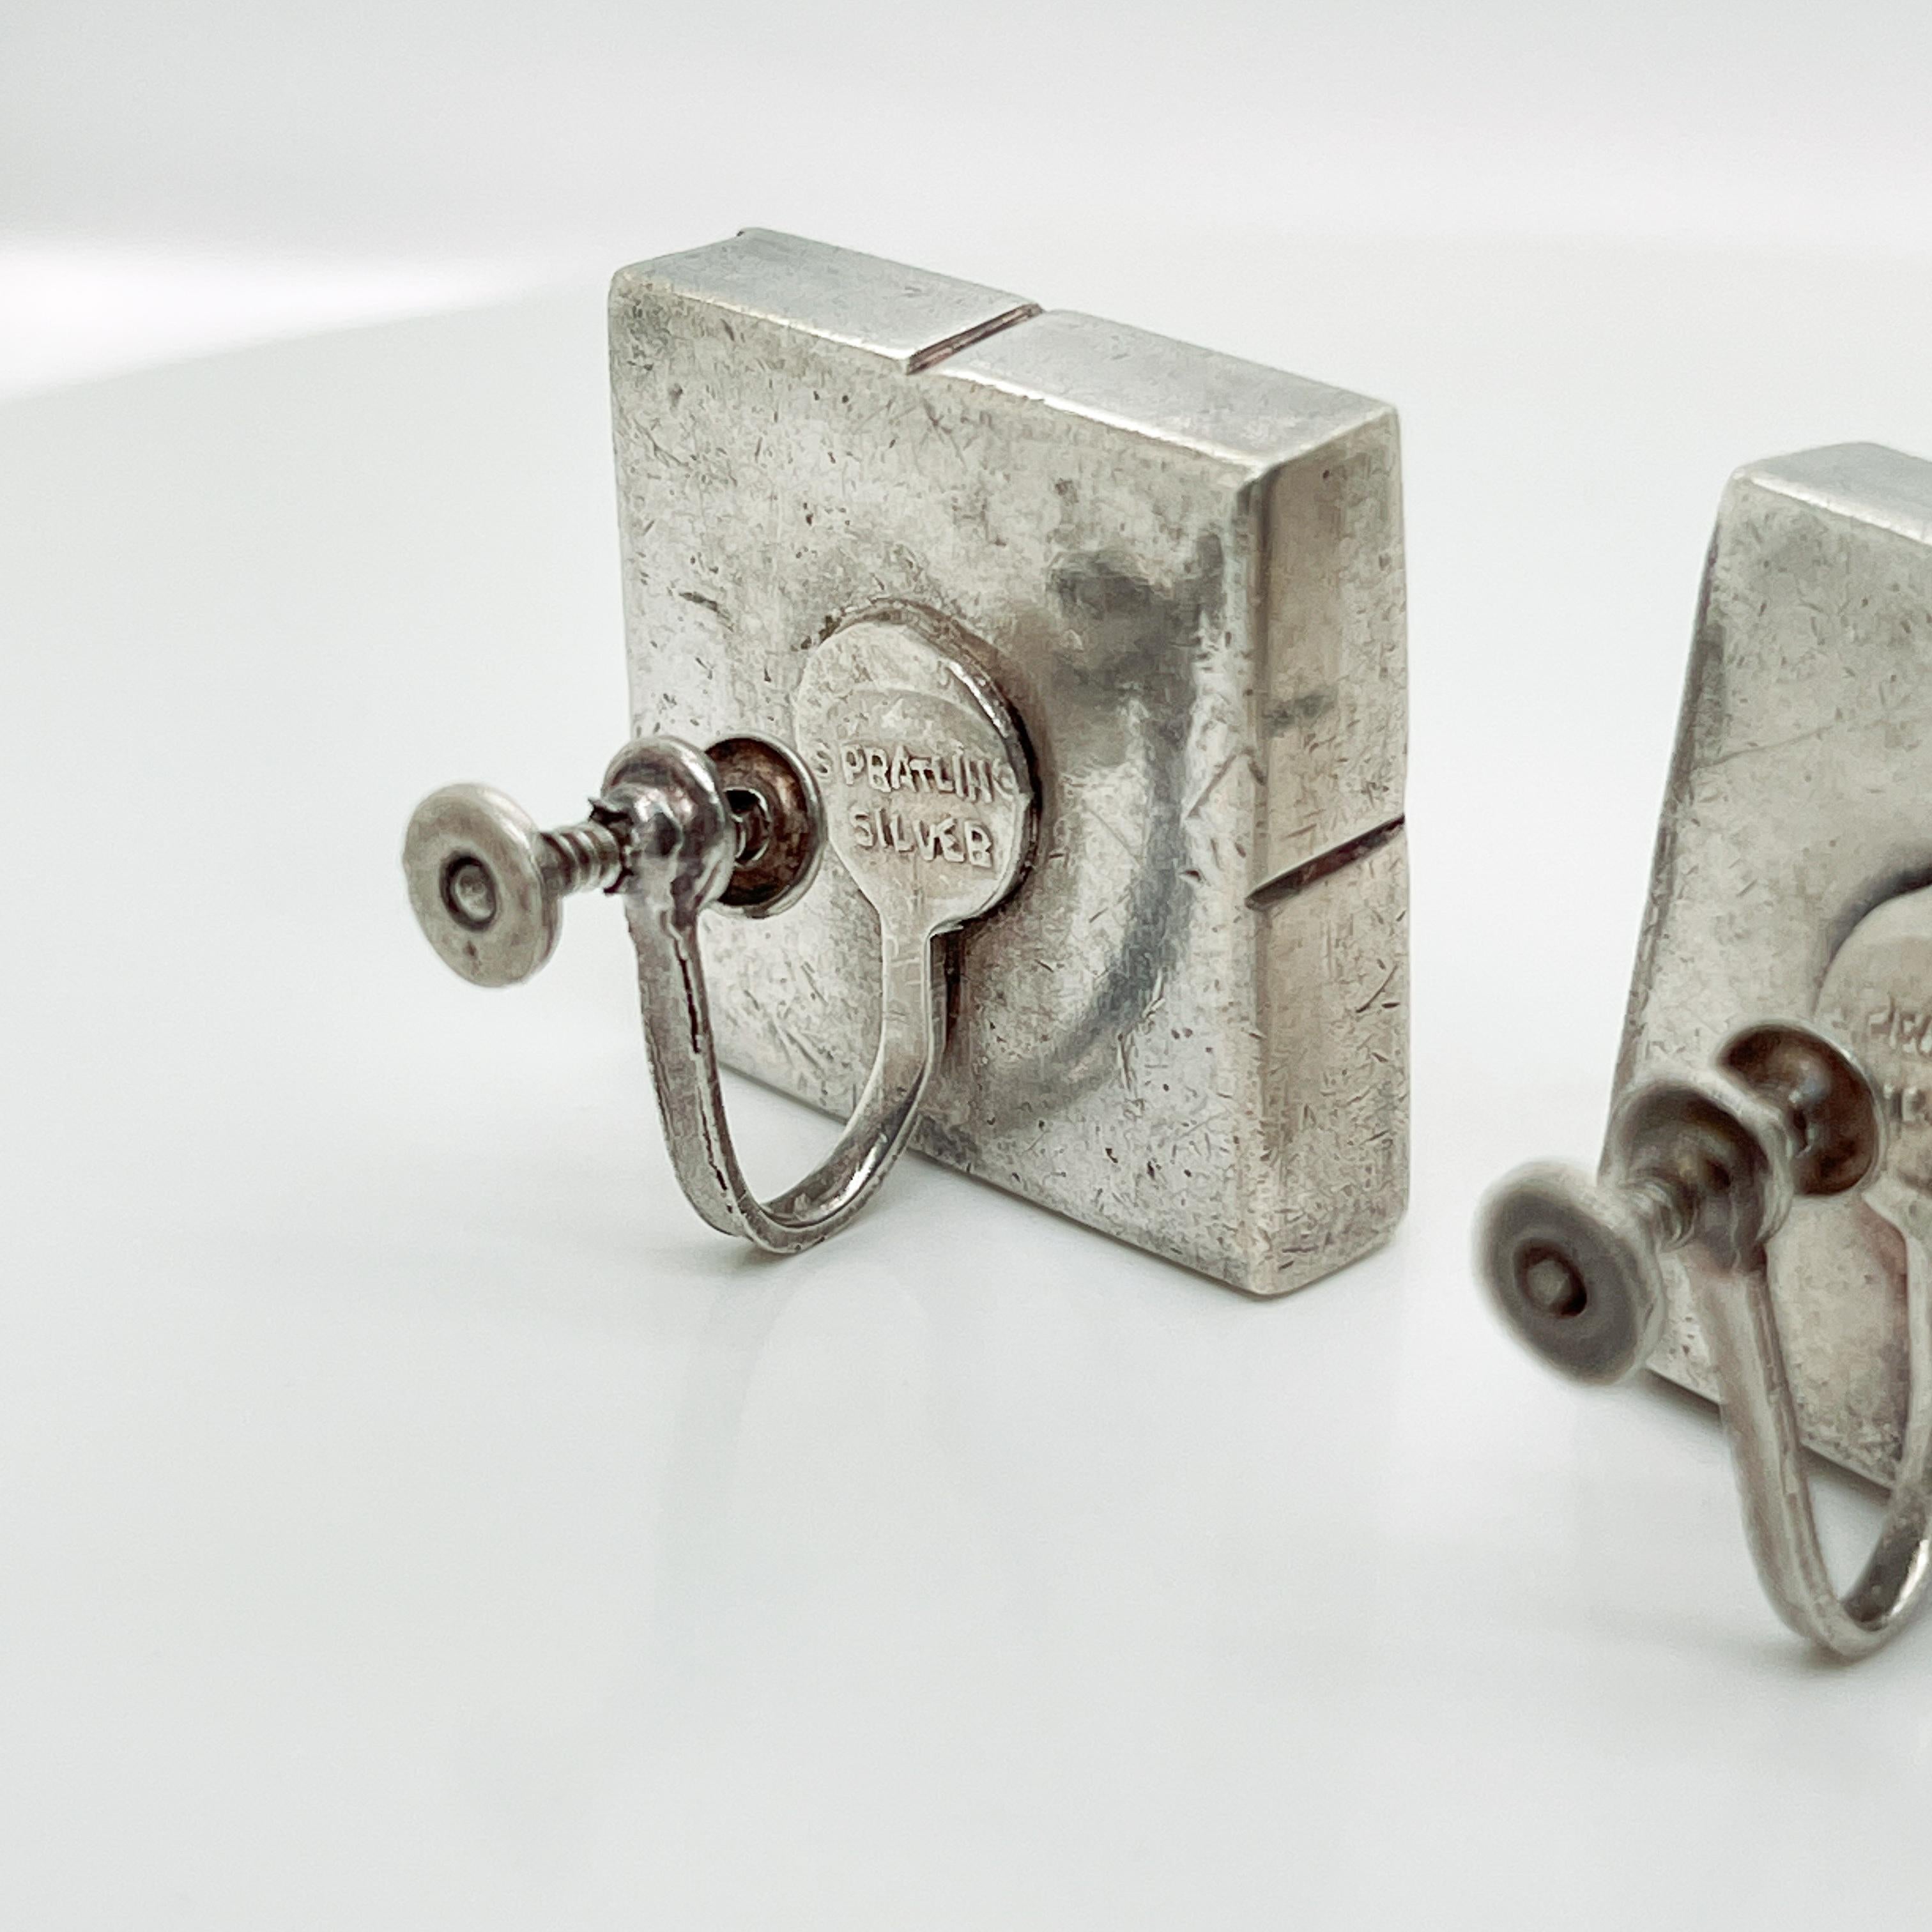 Vintage Mexican William Spratling Silver Modernist Square Cube Earrings & Brooch For Sale 3